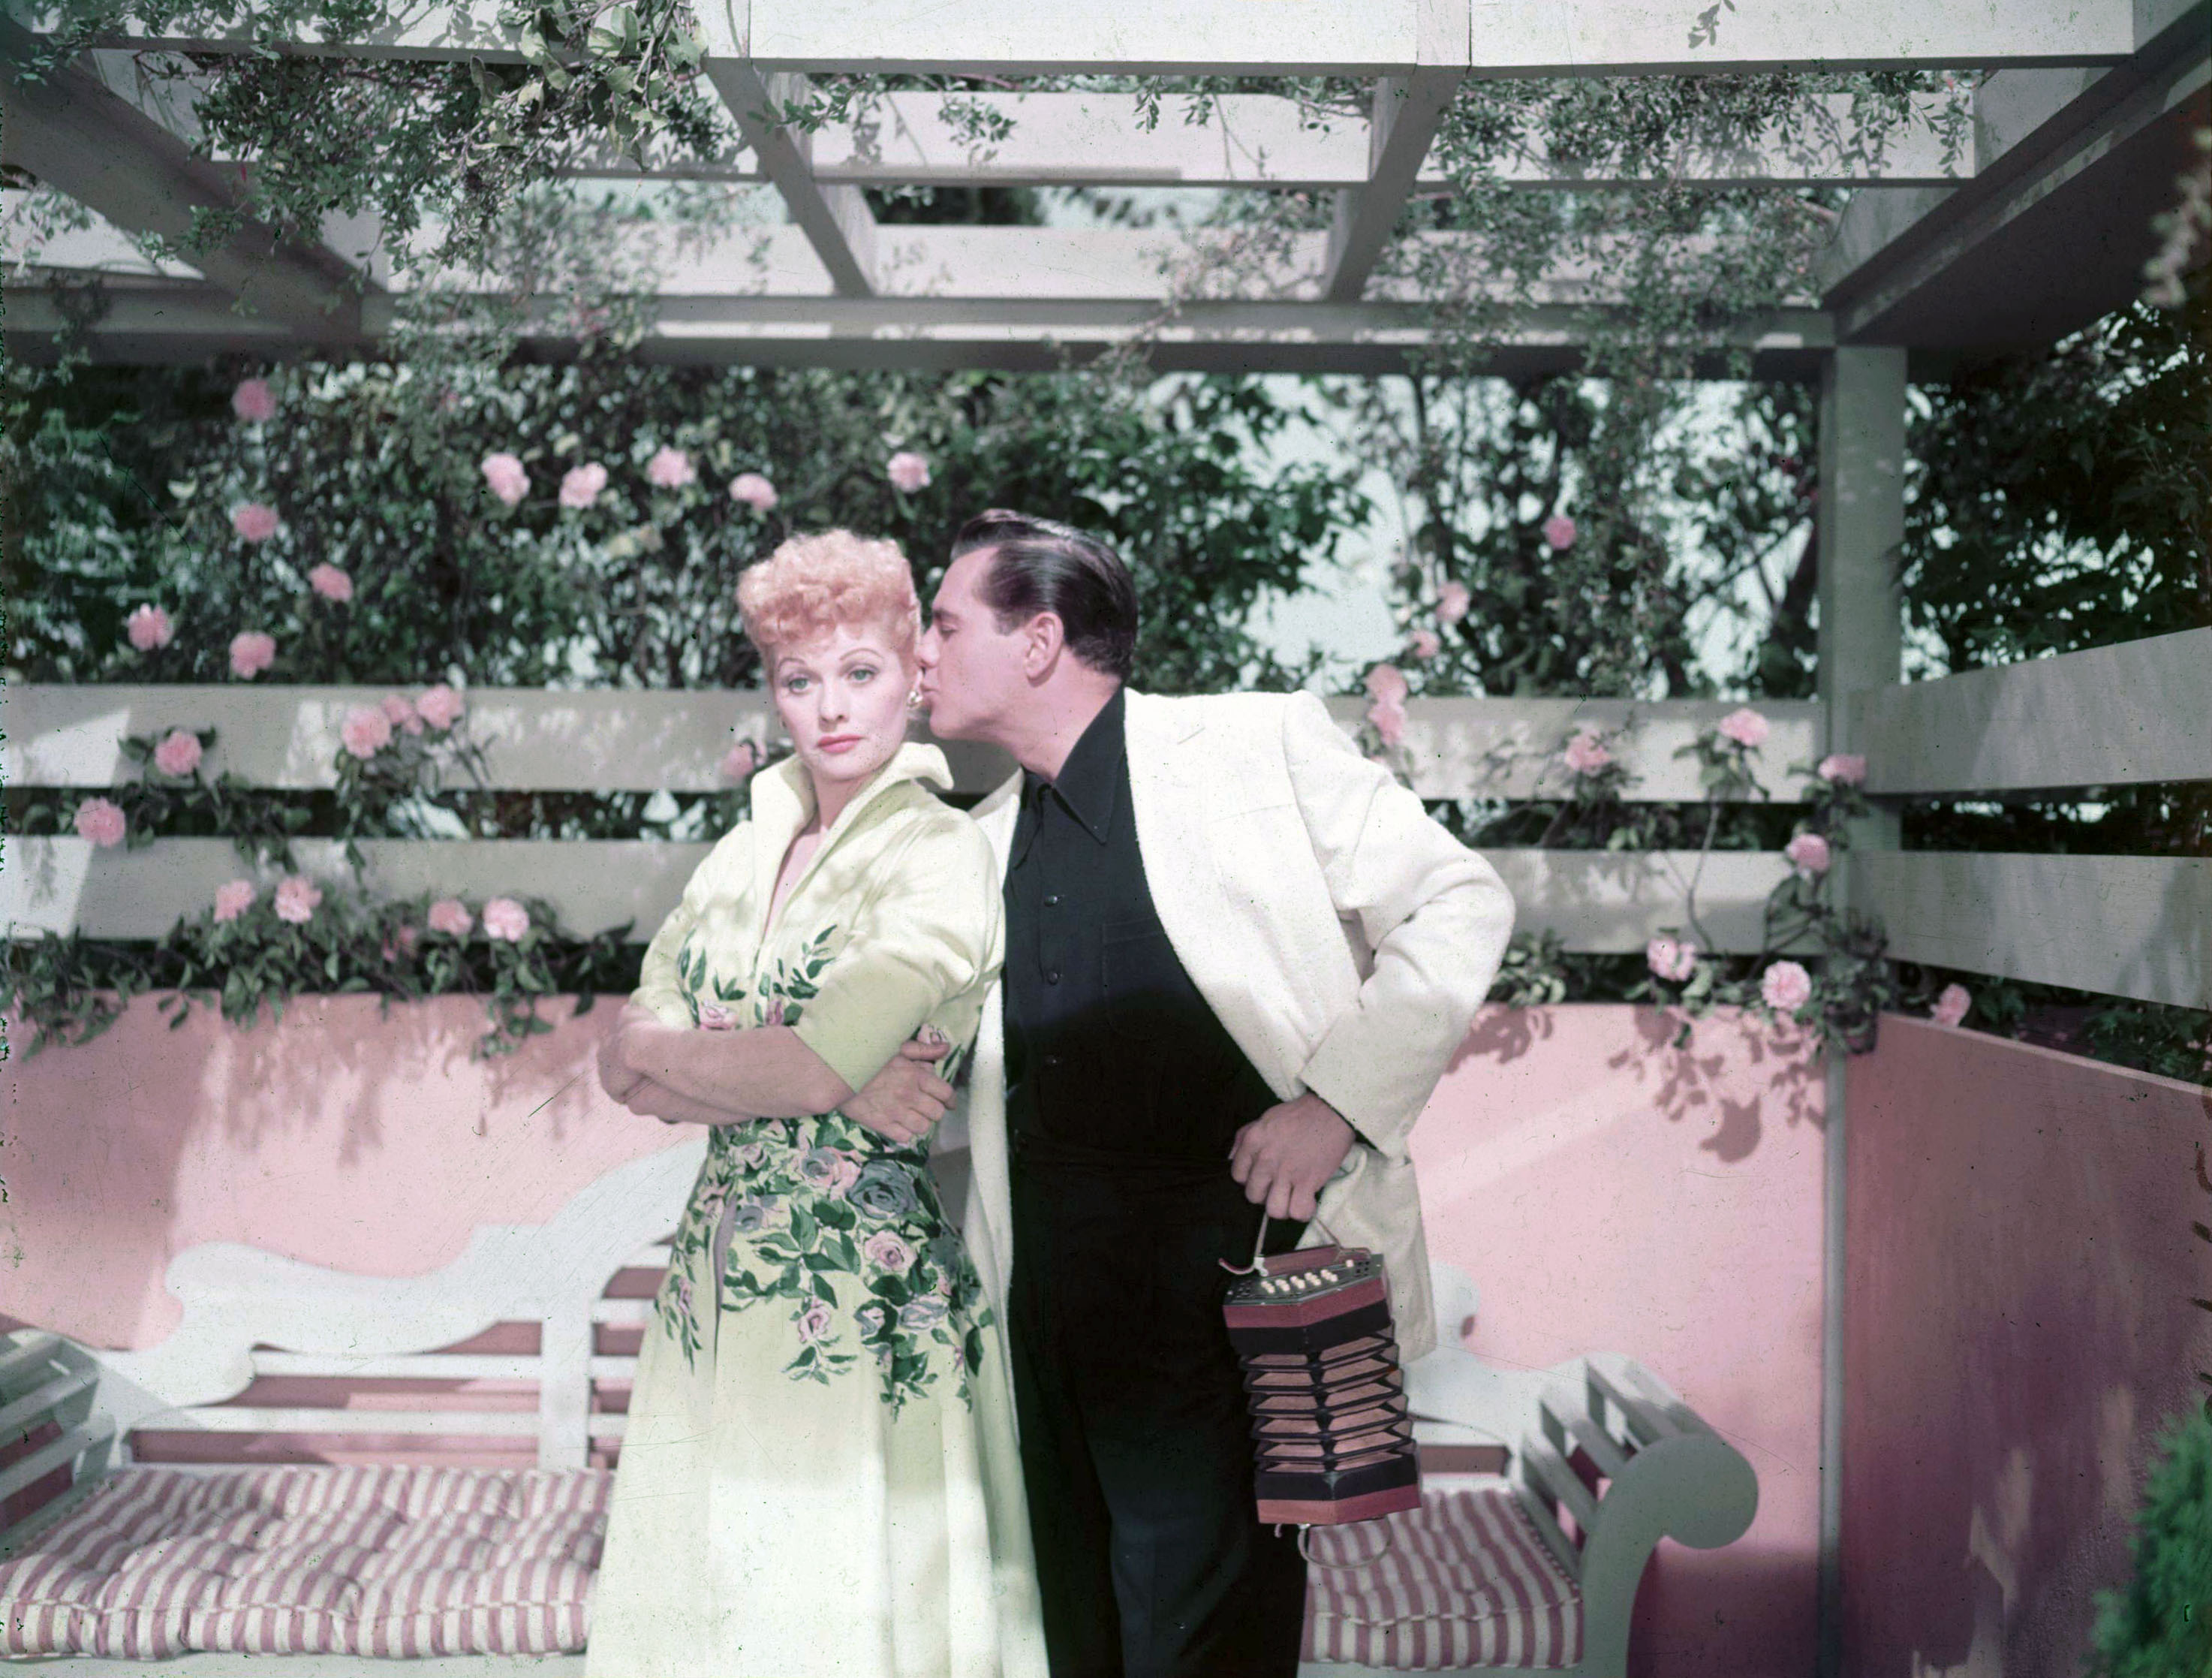 Lucille Ball and Desi Arnaz, circa 1955 | Source: Getty Images